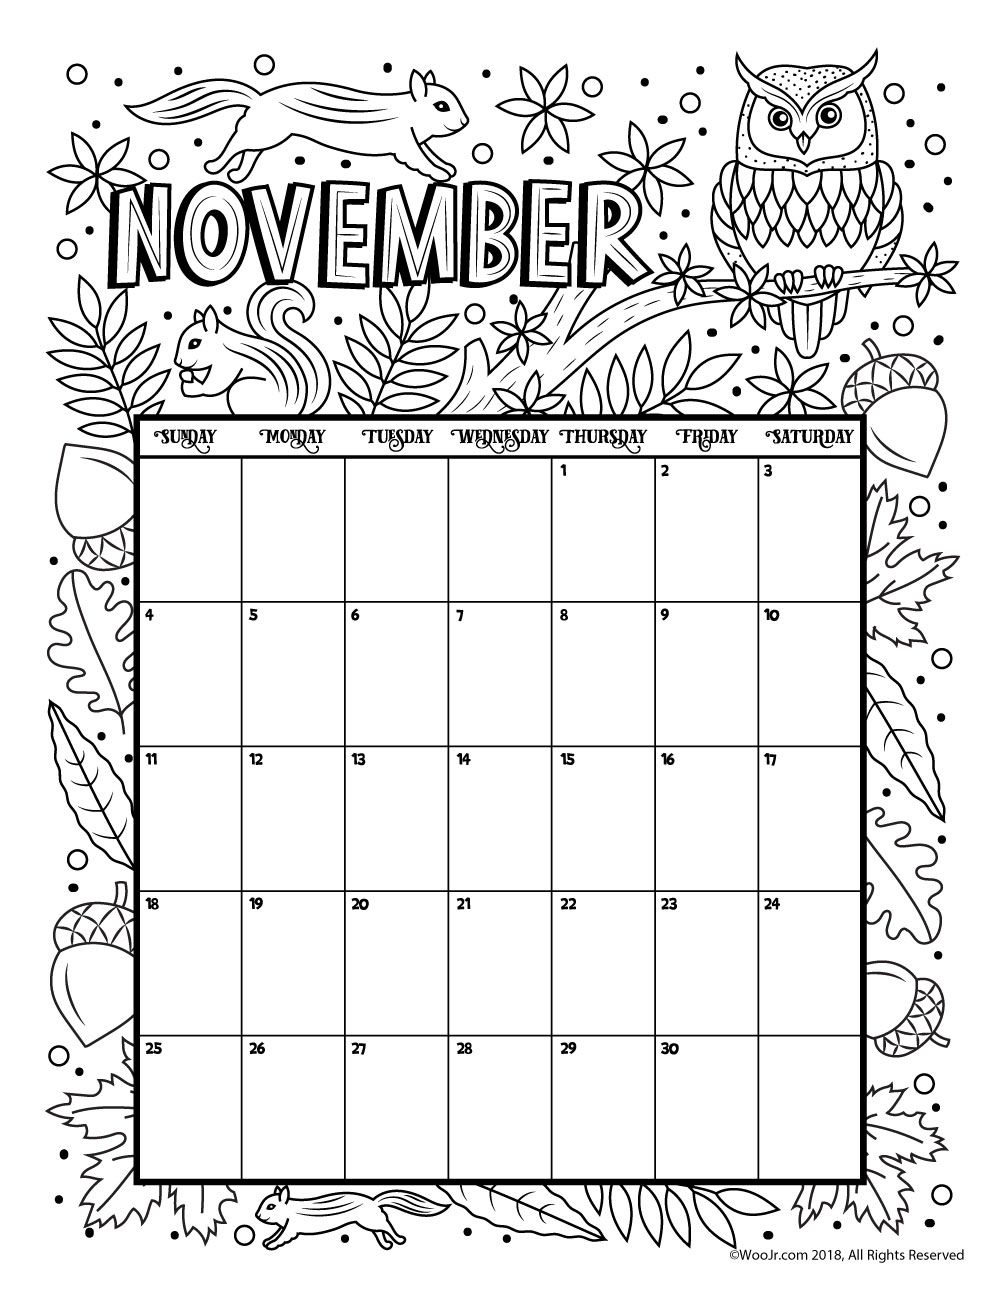 November 2018 Calendar Page Word Excel Template | Kids With Blank Calendar Template For Kids